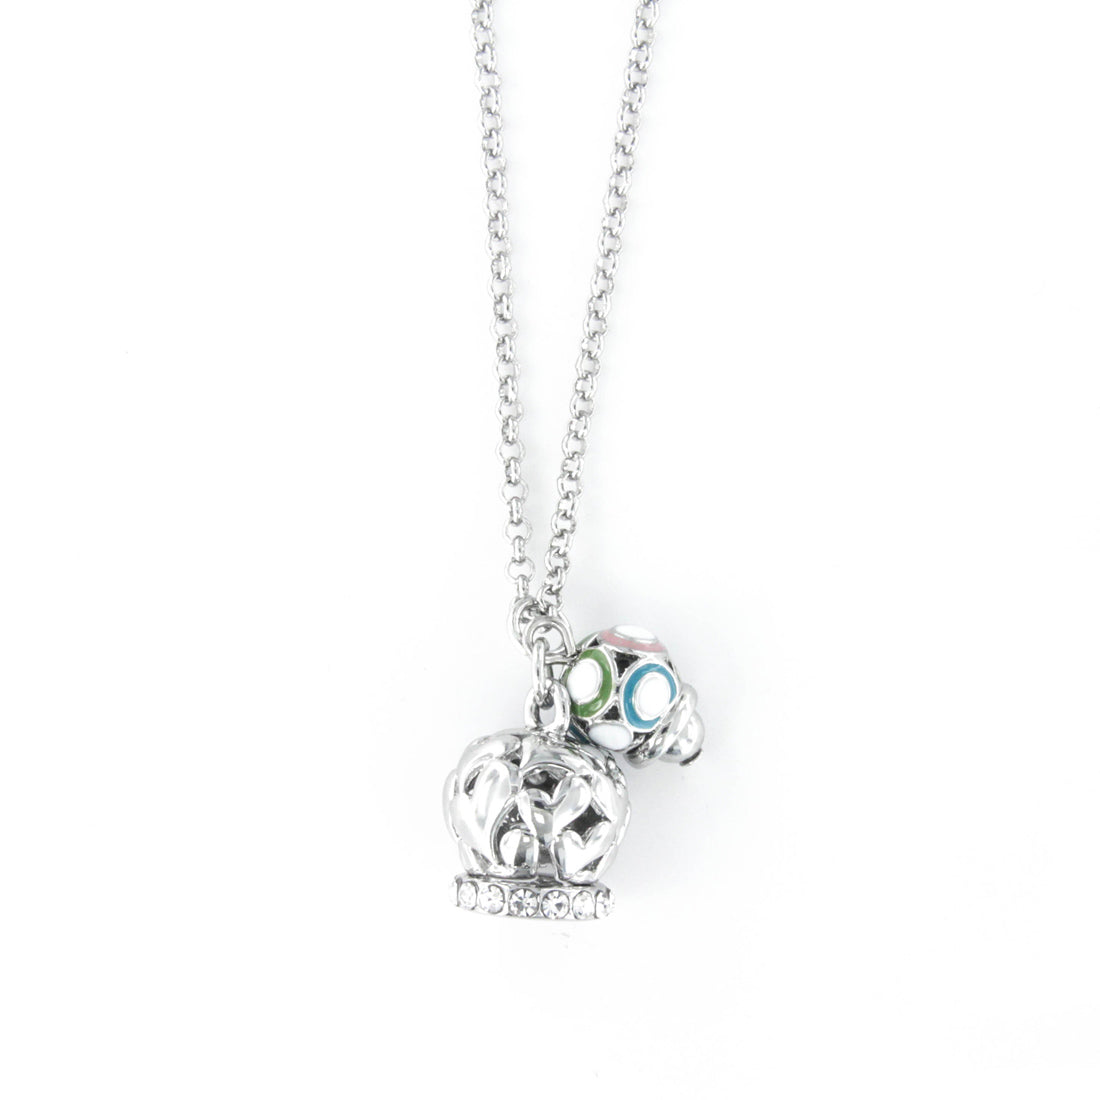 Metal necklace with bell from pierced bell with hearts with white crystals and small bell